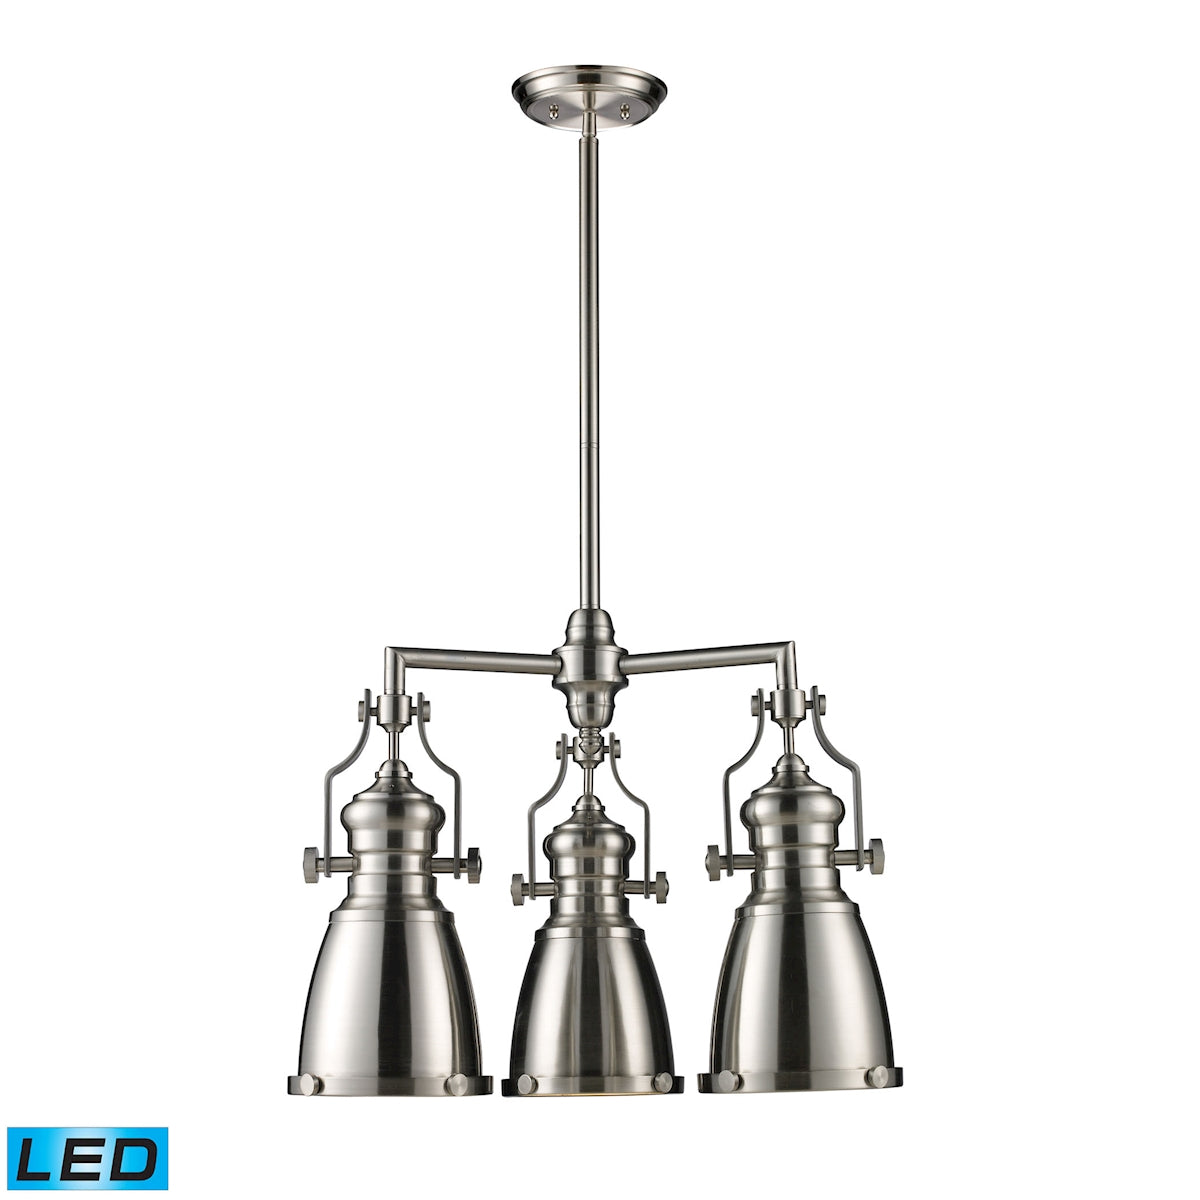 ELK Lighting 66120-3-LED Chadwick 3-Light Chandelier in Satin Nickel with Matching Shades - Includes LED Bulbs